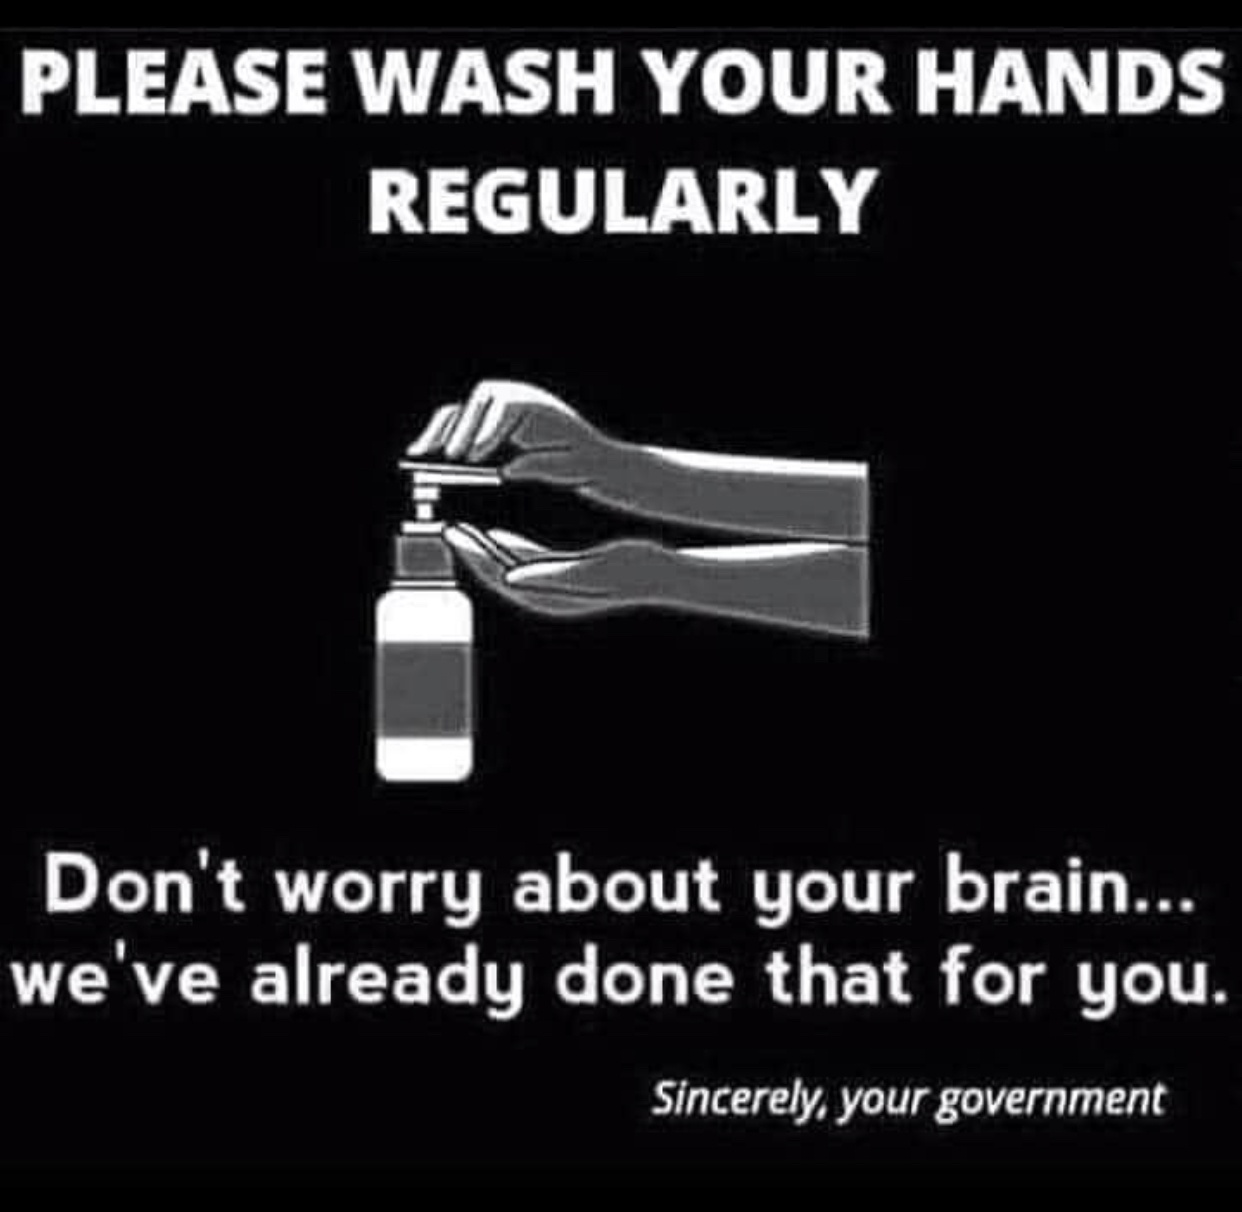 Please wash your hands. Your brain's already been washed. Love, your government. #4 of 23 COVID memes via Jennifer Margulis, Ph.D.